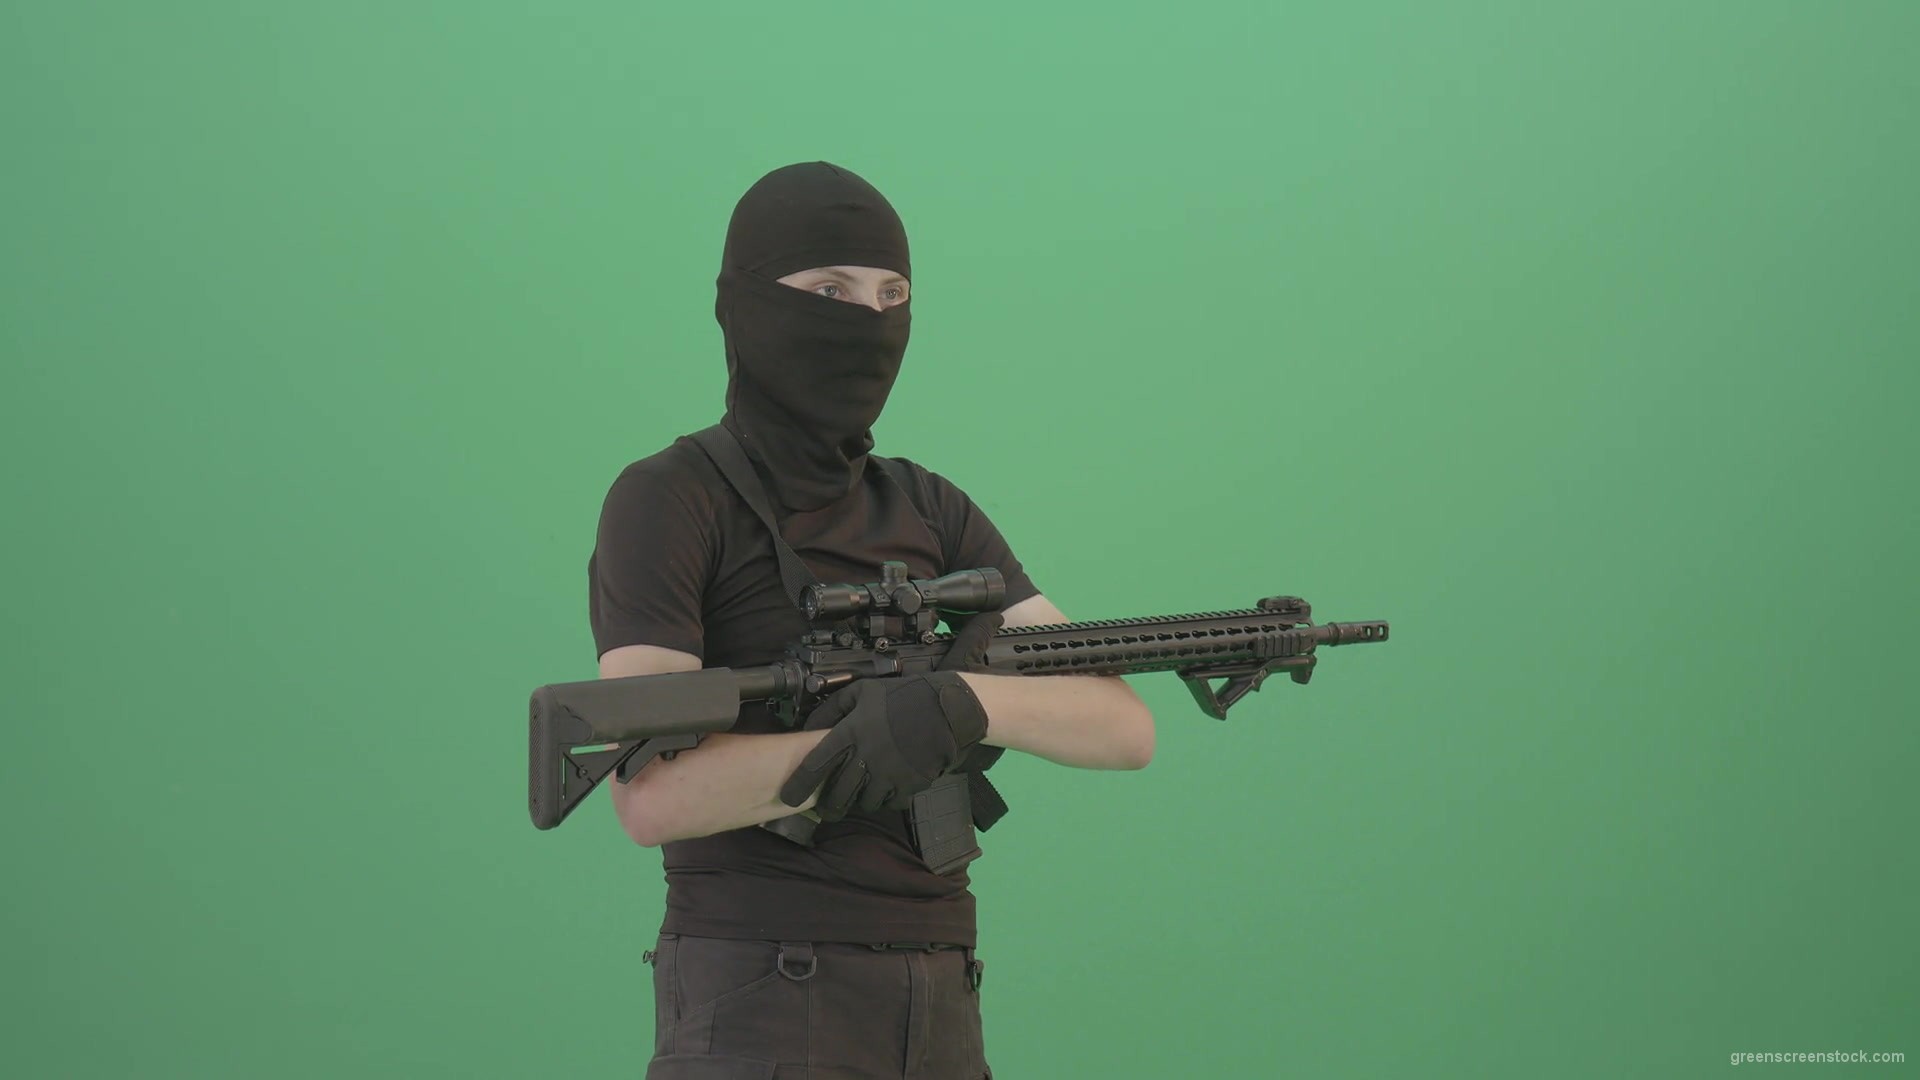 Soldier-man-with-weapon-looking-enemies-isolated-on-green-screen-4K-Video-Footage-1920_004 Green Screen Stock